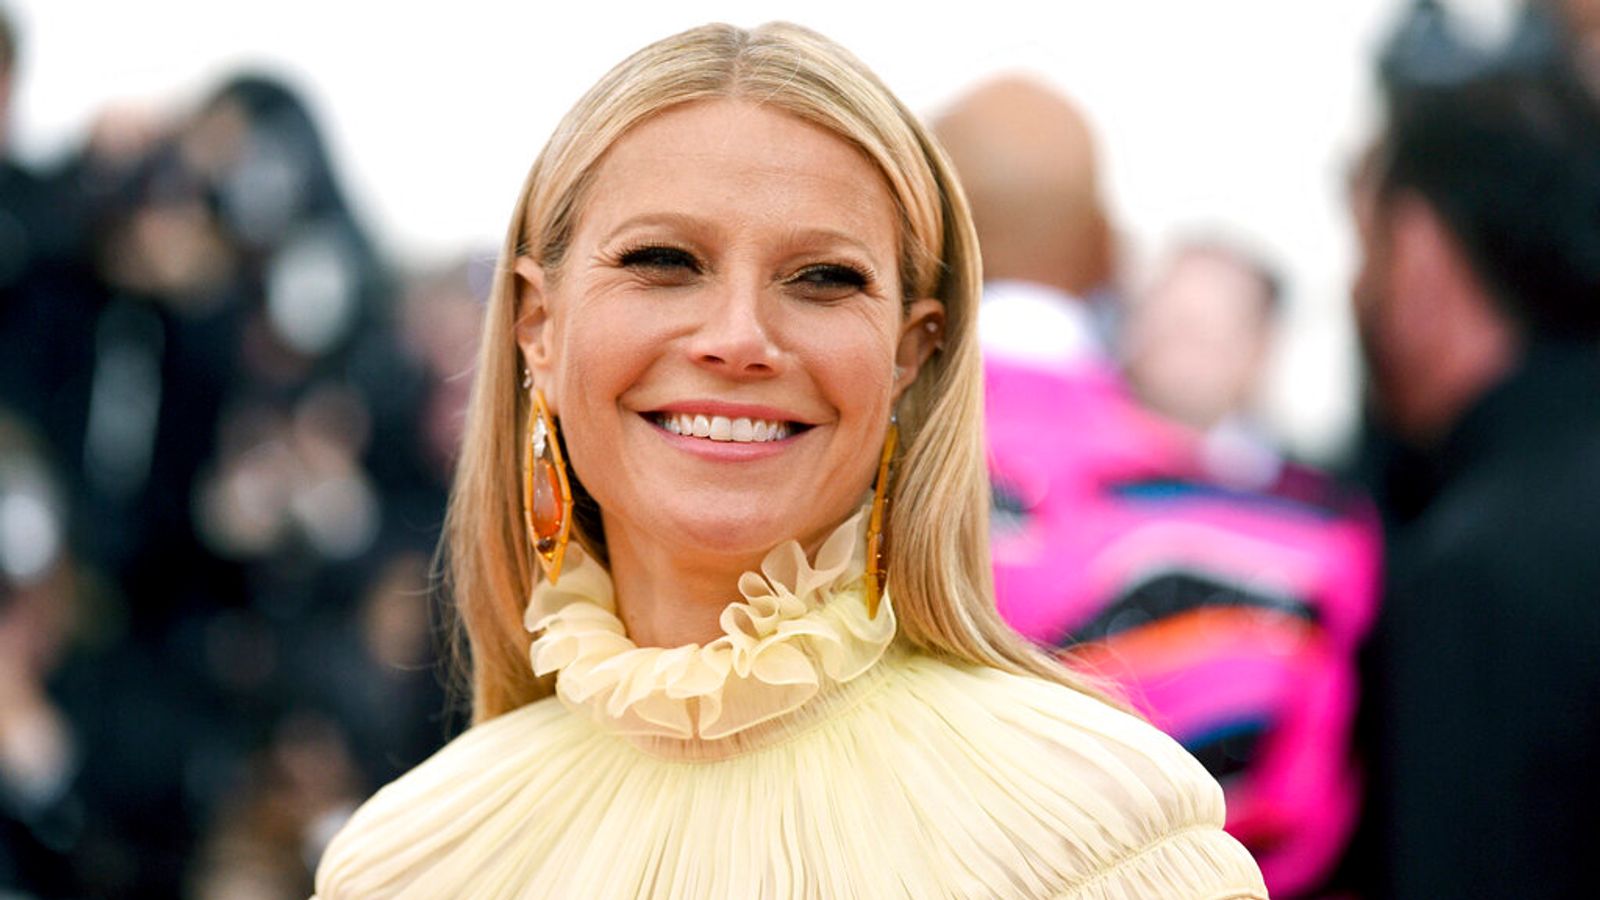 Gwyneth Paltrow ski crash court case due to start in US after man accused her of seriously injuring him in 'hit-and-run'